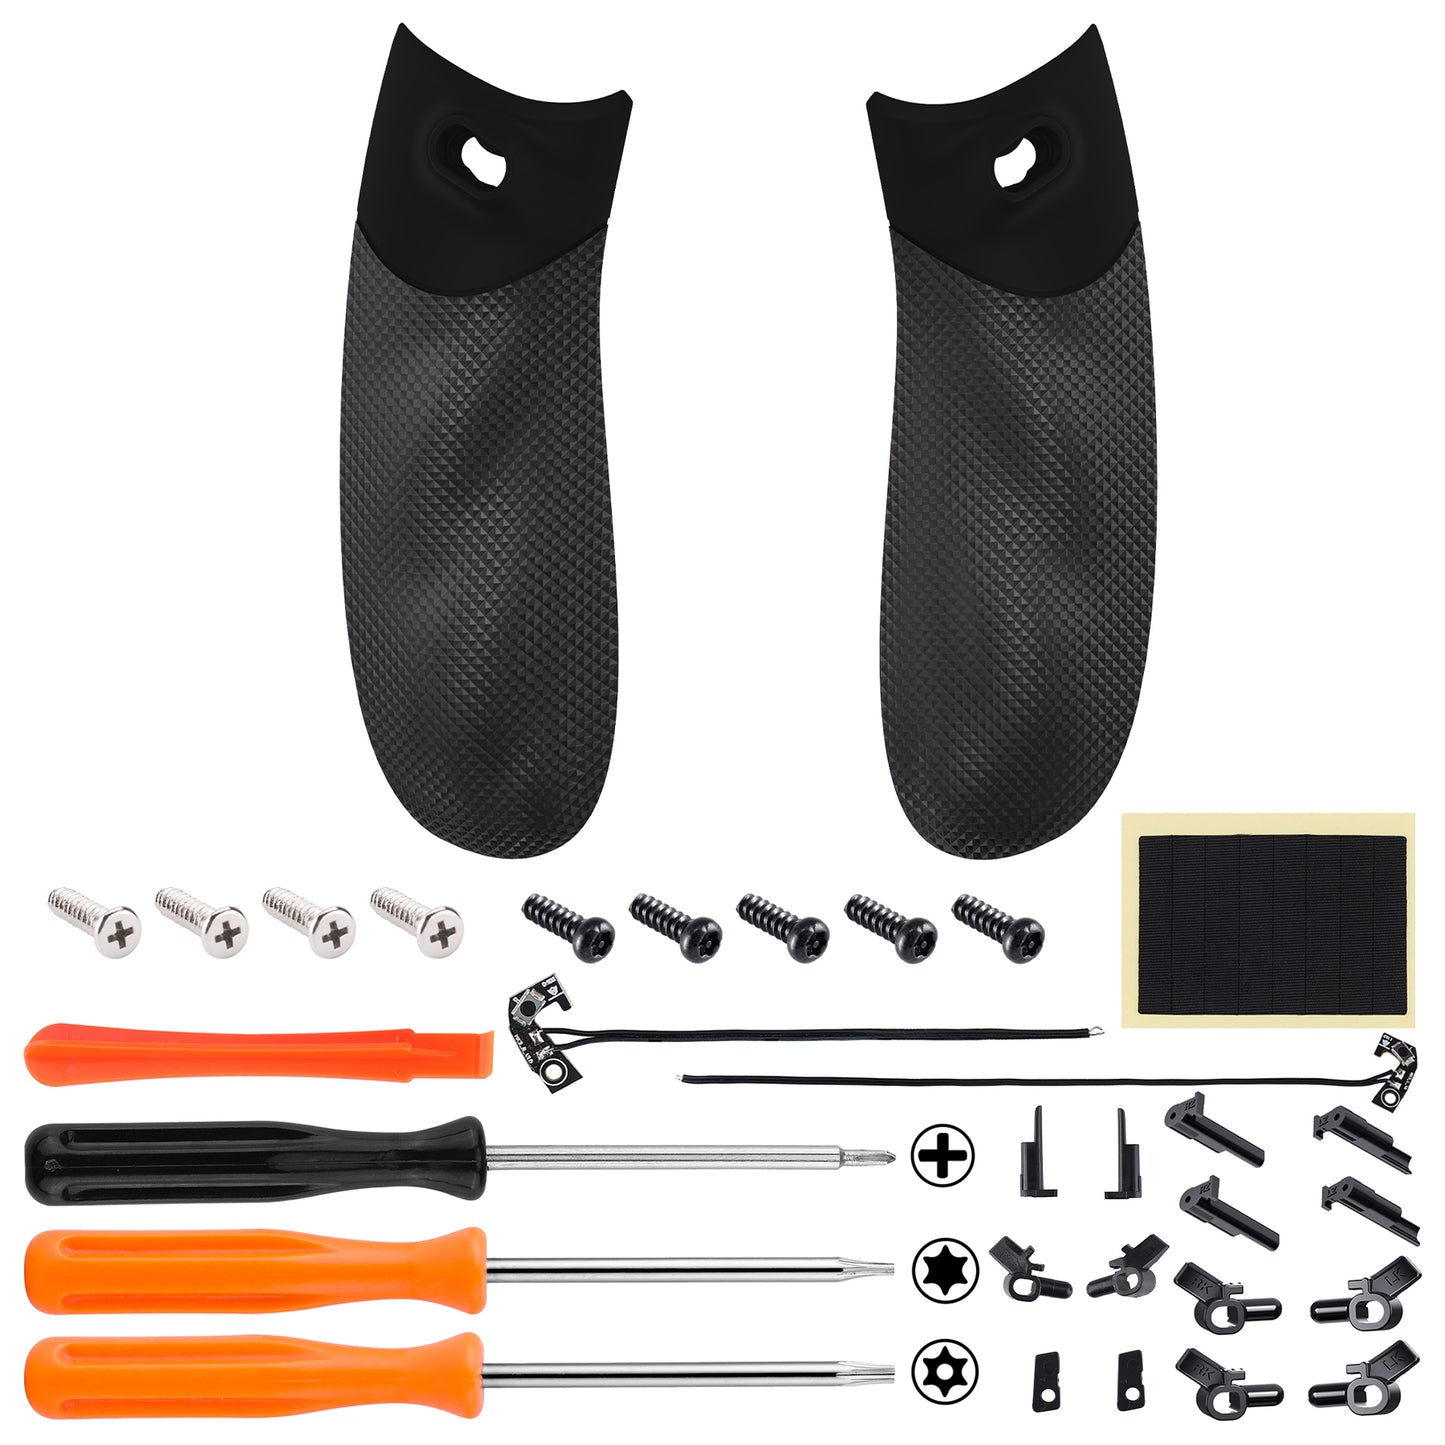 eXtremeRate Retail Flexor Clicky Rubberized Side Rail Grips Trigger Stop Kit for Xbox Series X & S Controller, Diamond Textured Black Anti-Slip Ergonomic Trigger Stopper Handle Grips for Xbox Core Controller - PX3Q3001P